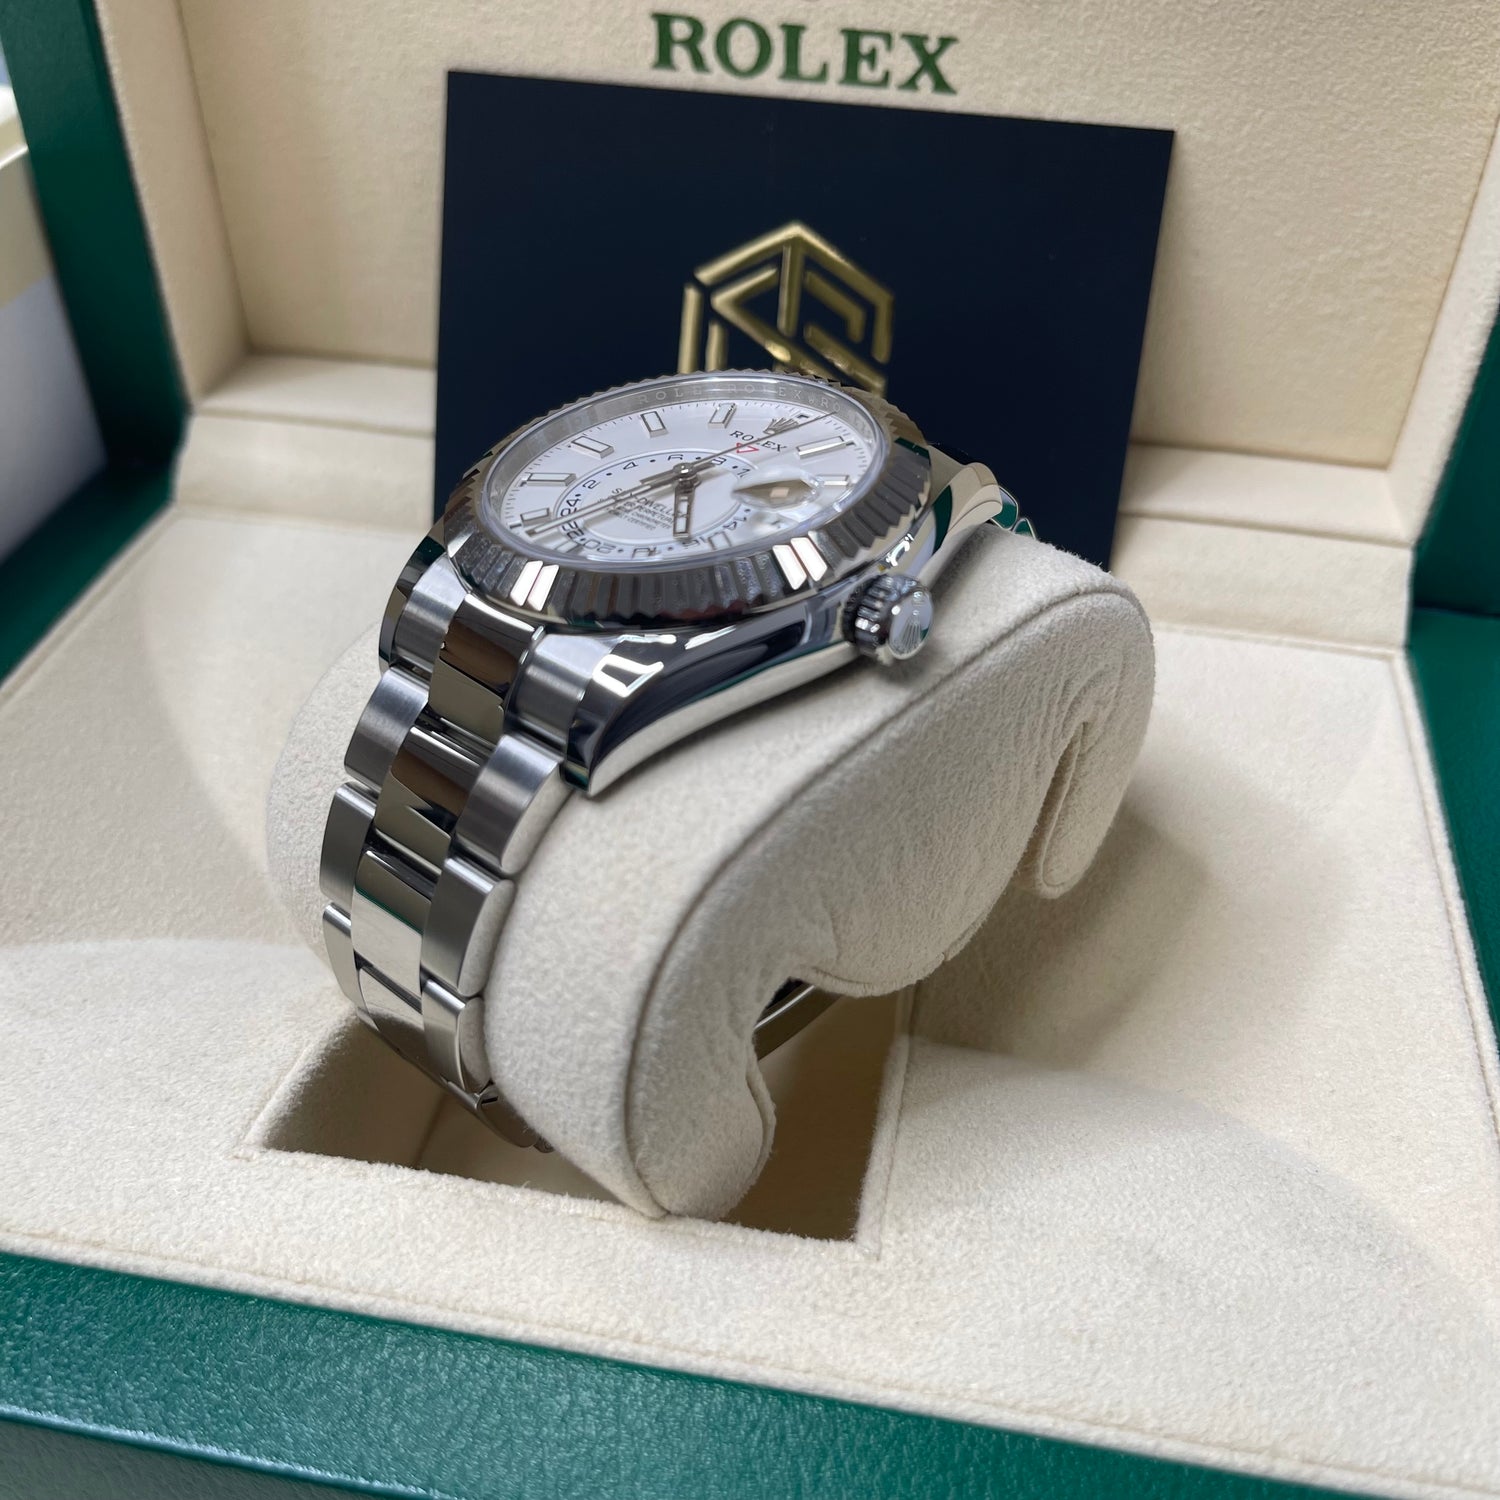 Rolex Sky-Dweller White Dial 326934 2021 Mint Condition Full Set Watch